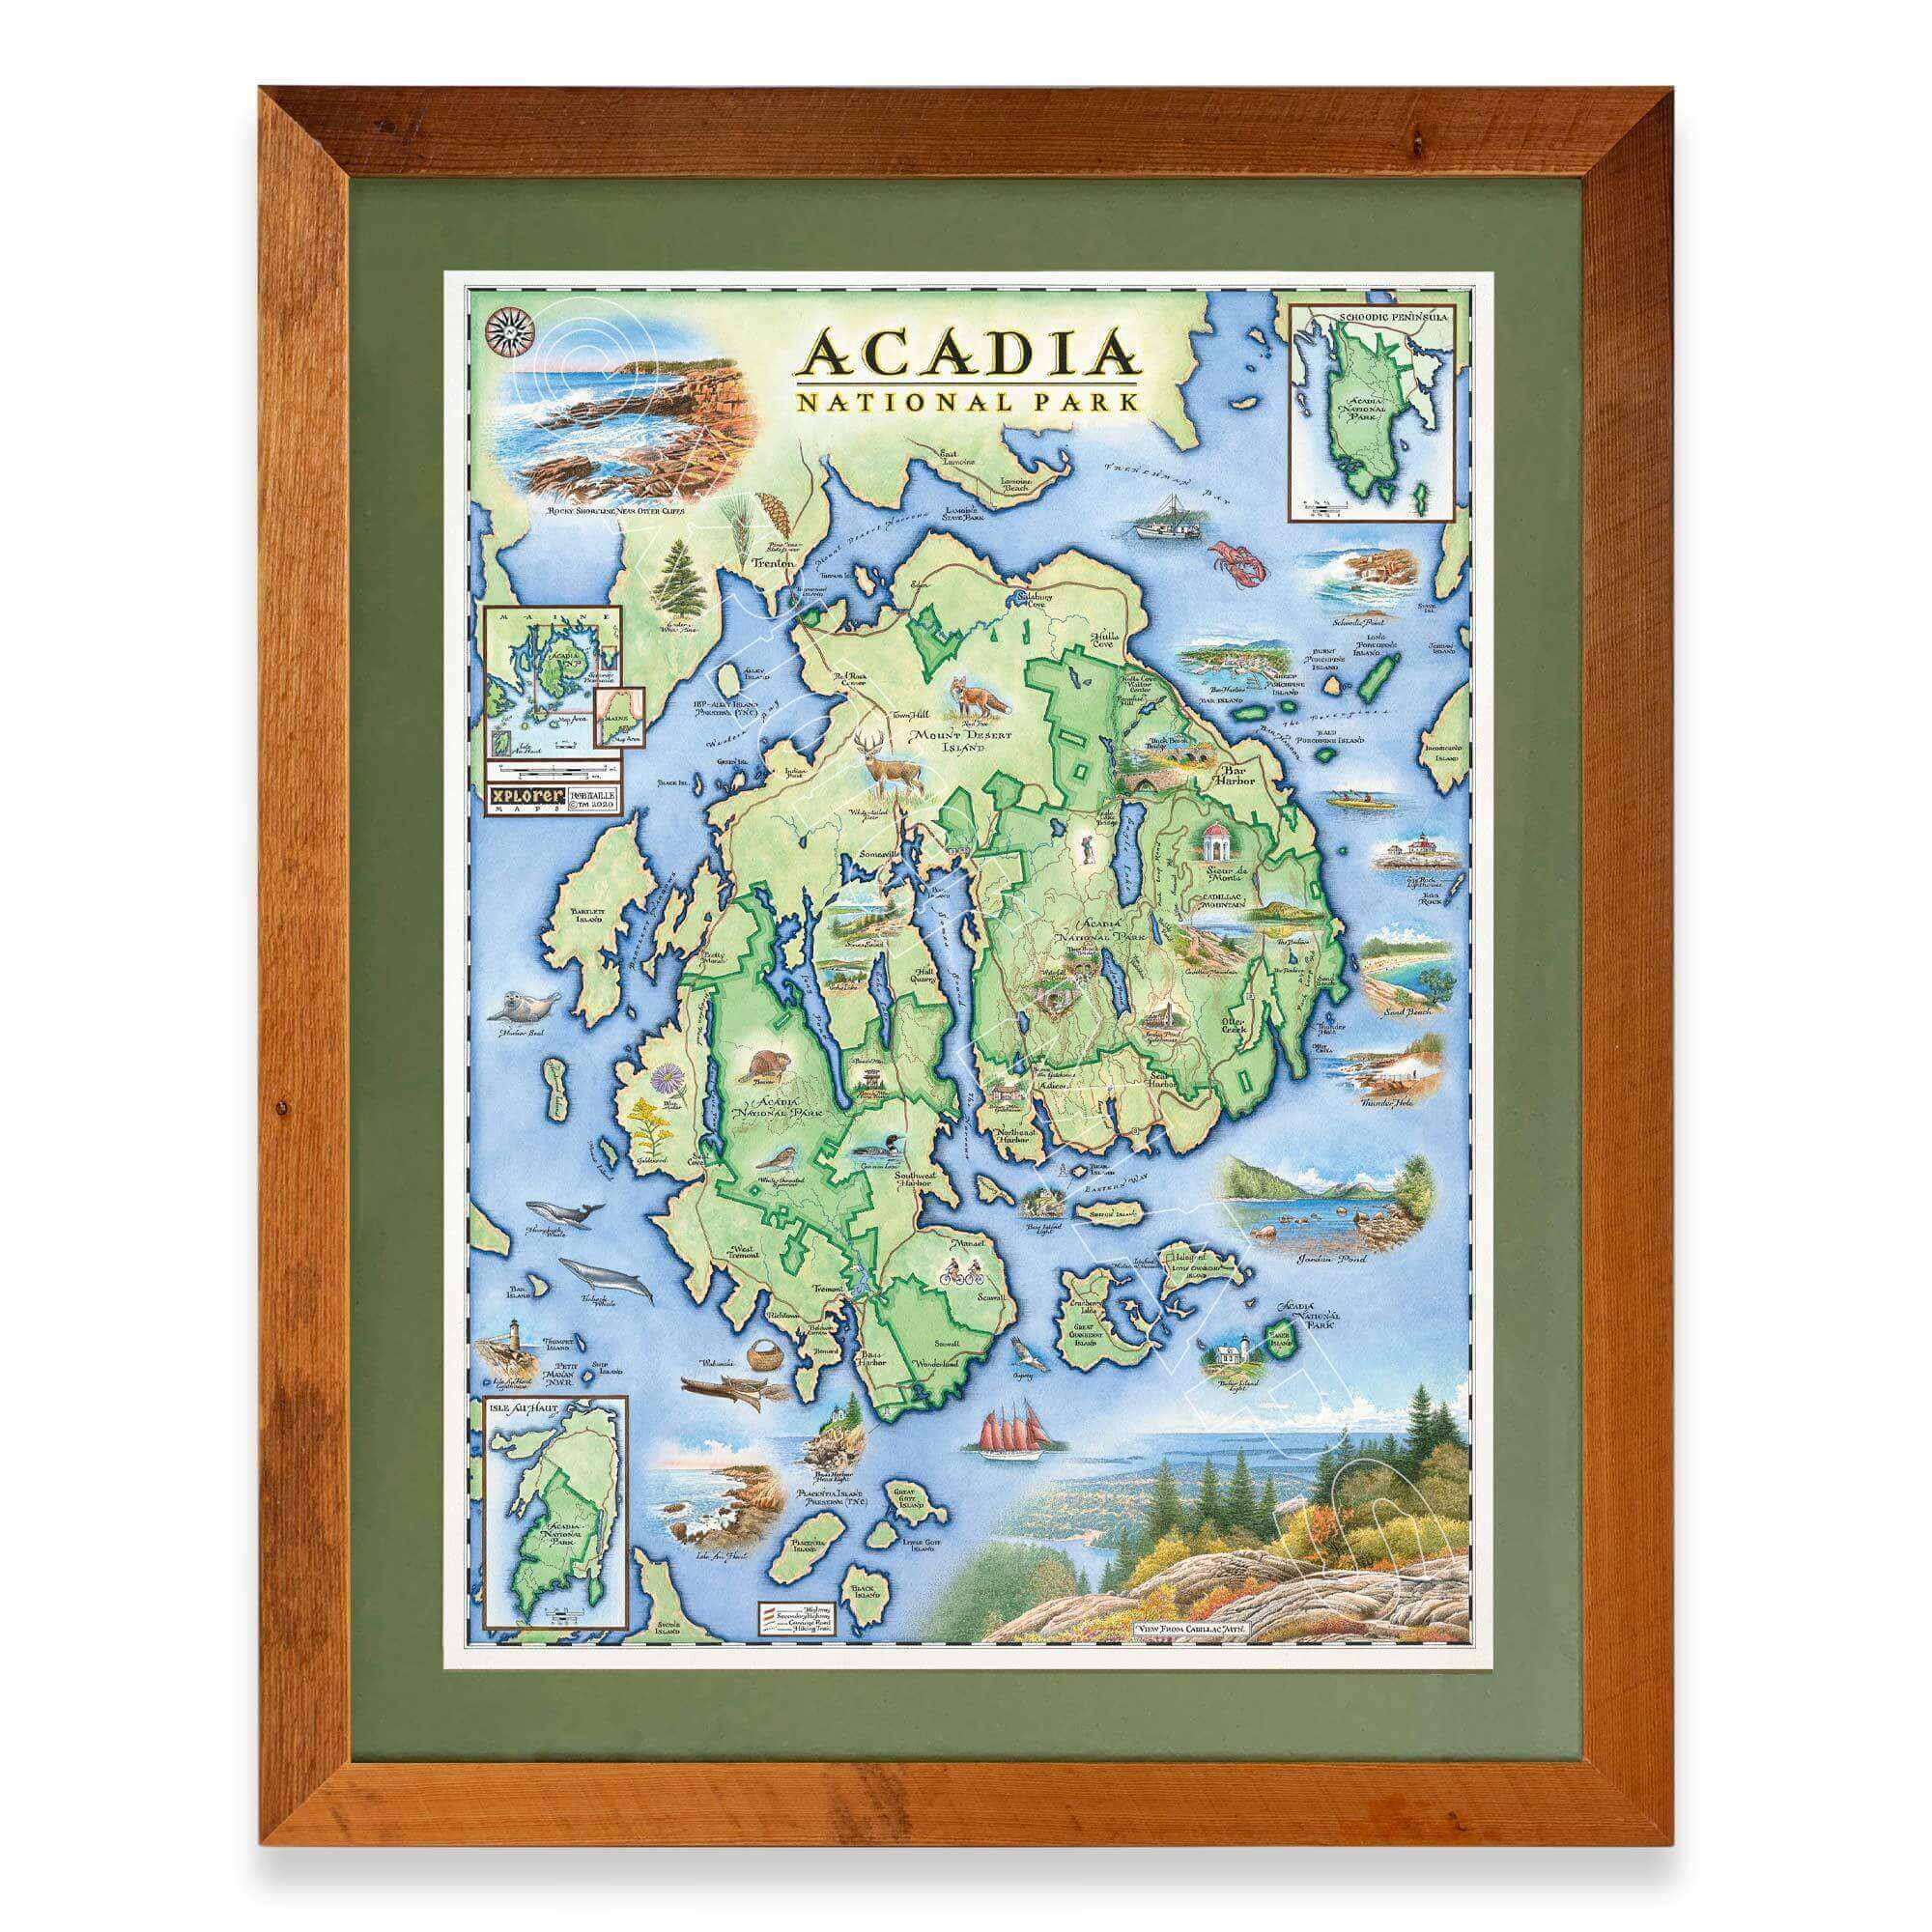 Acadia National Park hand-drawn map in a Montana Flathead Lake reclaimed larch wood frame and green mat. 